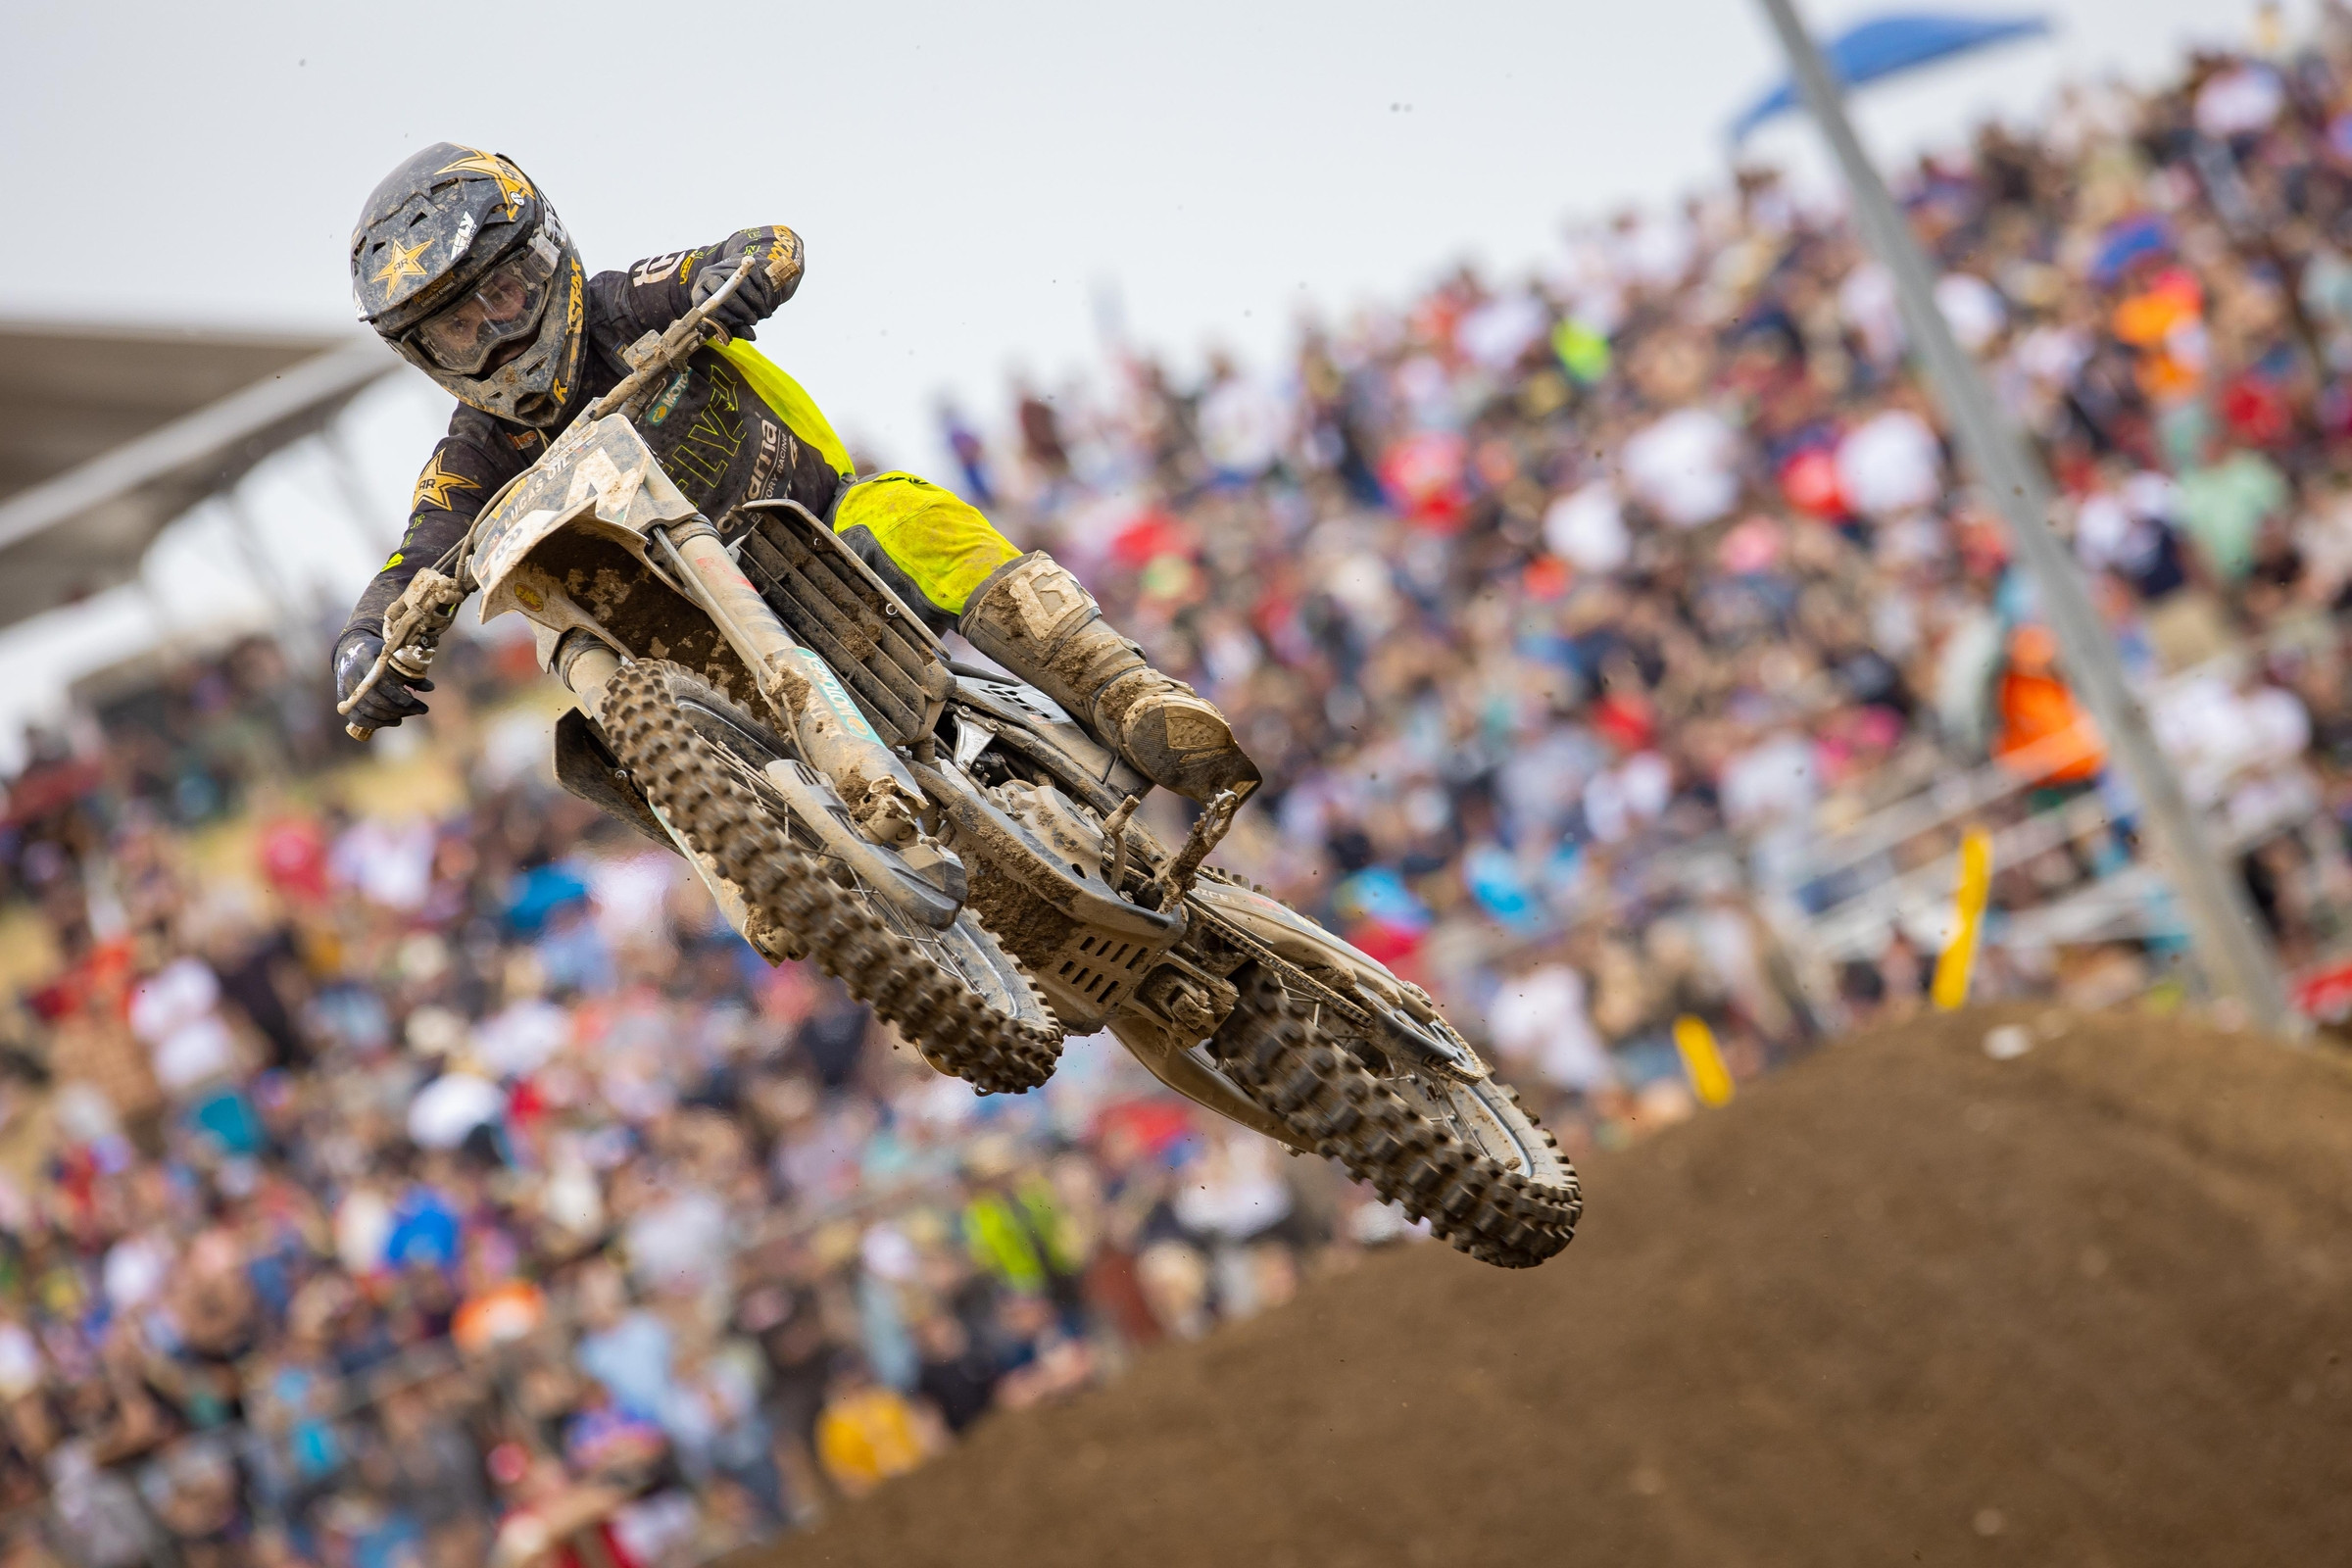 RJ Hampshire Provides Injury Update Following Hangtown National Racer X